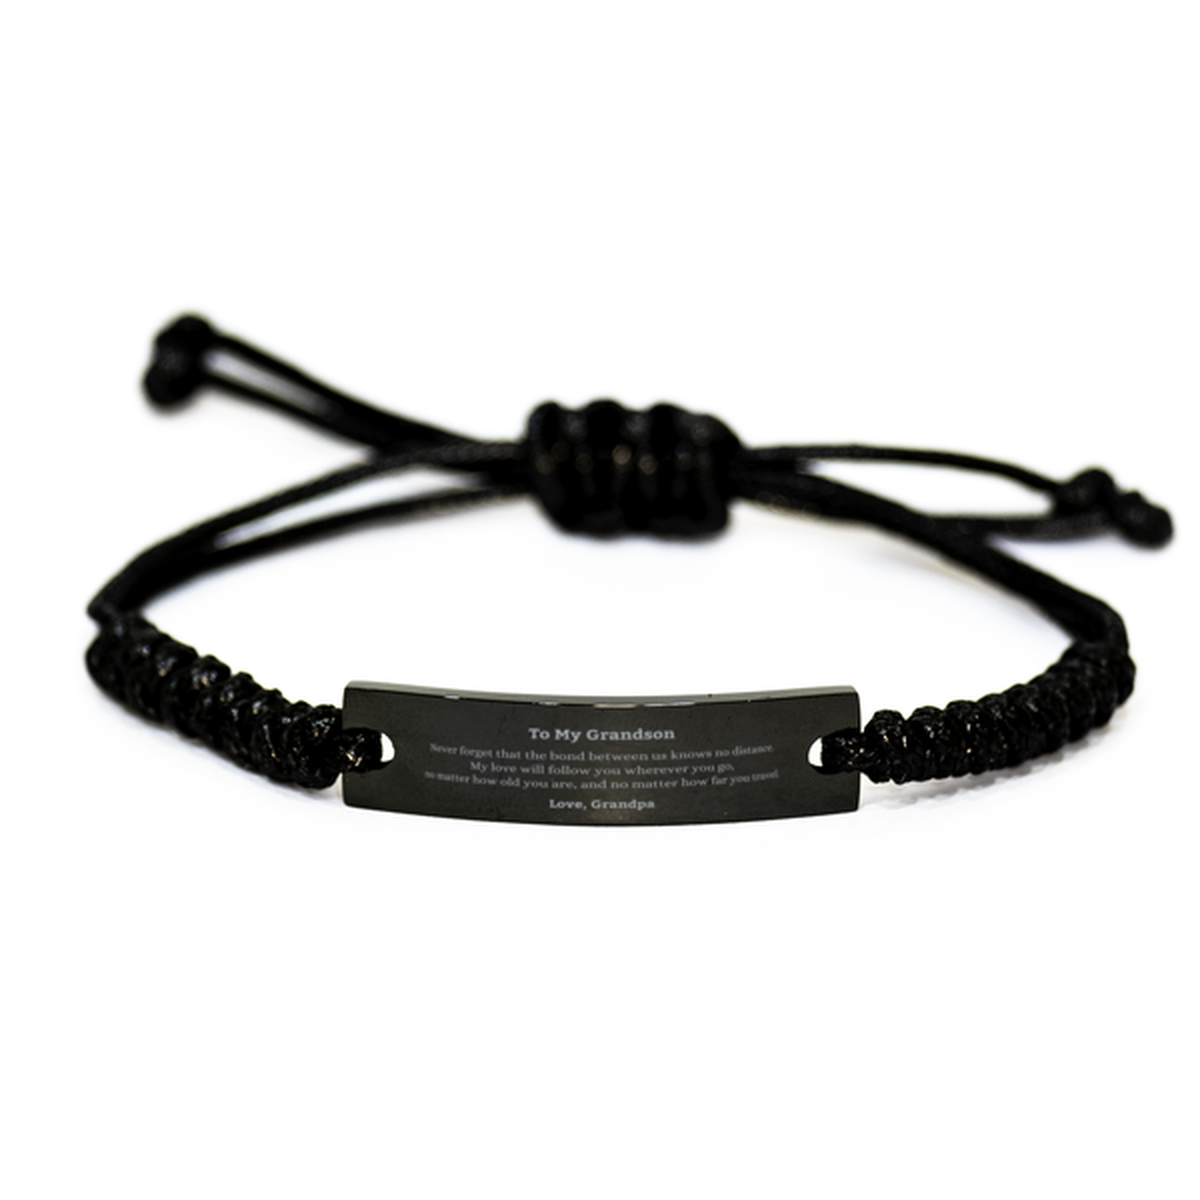 Grandson Birthday Gifts from Grandpa, Adjustable Black Rope Bracelet for Grandson Christmas Graduation Unique Gifts Grandson Never forget that the bond between us knows no distance. Love, Grandpa